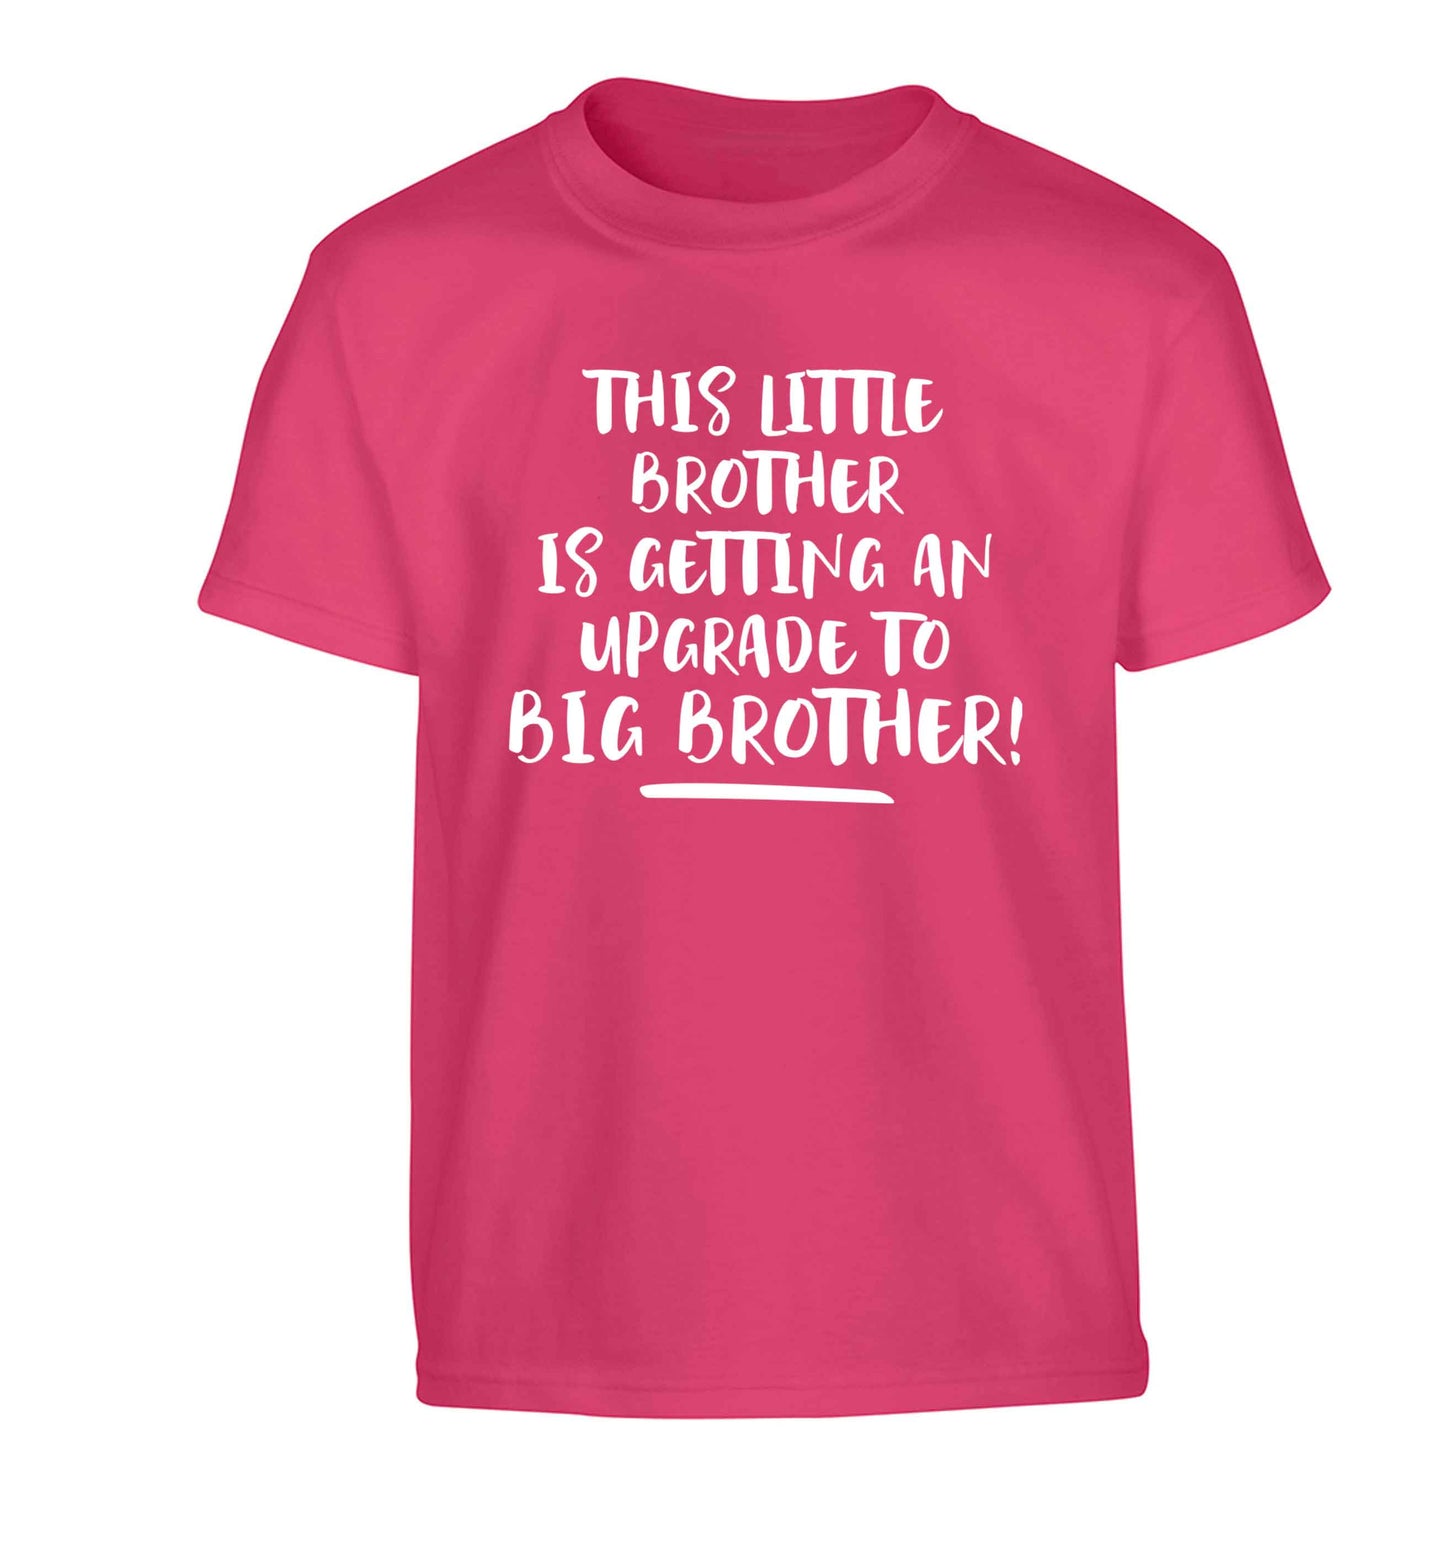 This little brother is getting an upgrade to big brother! Children's pink Tshirt 12-13 Years